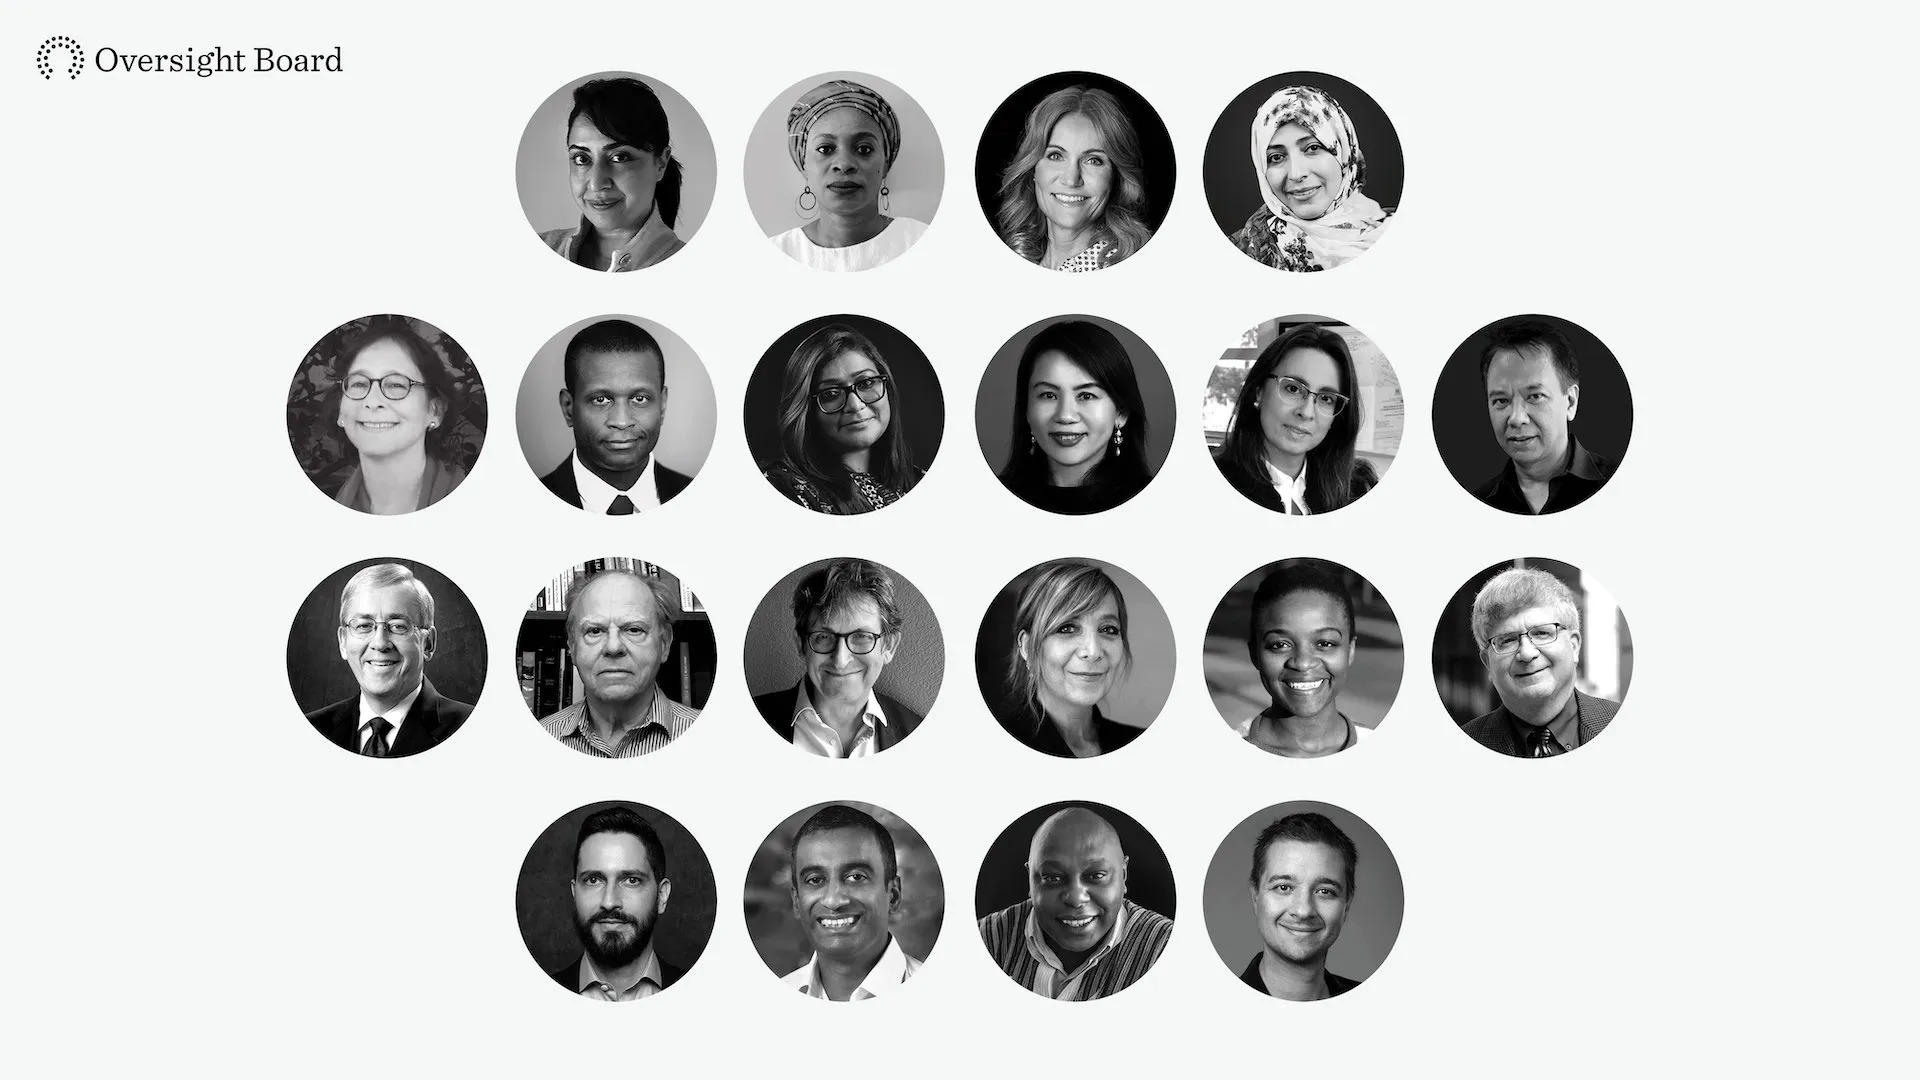 A collection of photos of Meta Oversight Board members.  A series of circular images showing black-and-white head shots of each of the 20 members.